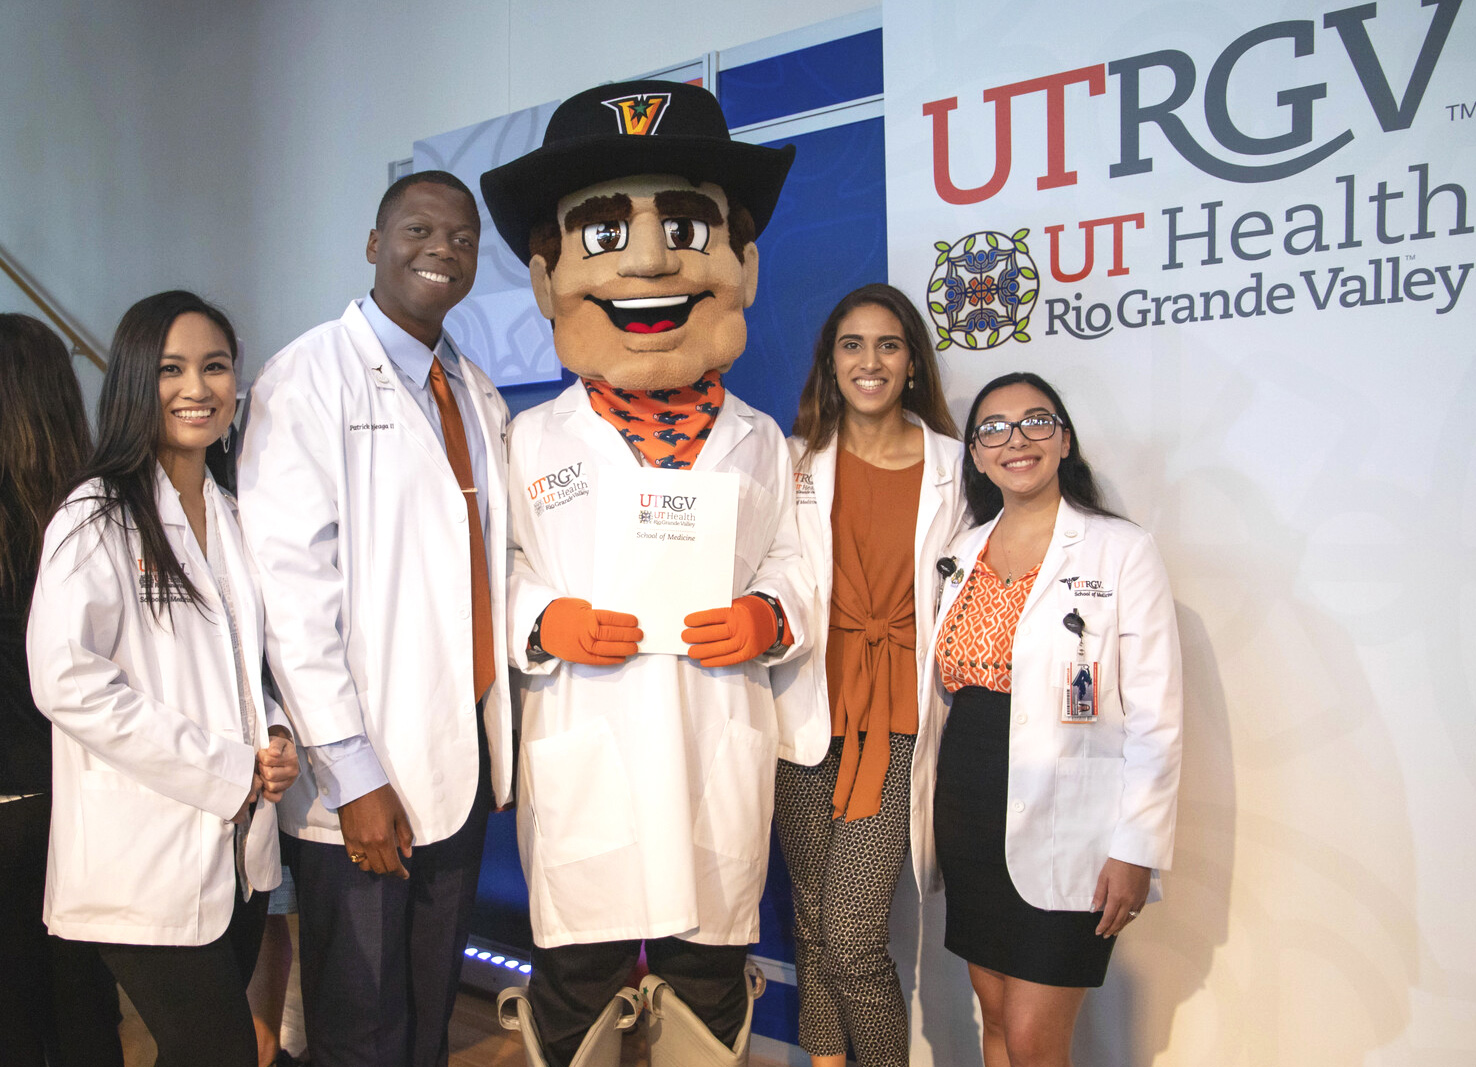 The UTRGV School of Medicine, in partnership with the Honors College, announced Monday, Oct. 21, a new early-assurance, pre-med program for high school students throughout the Rio Grande Valley. Vaqueros MD, designed to increase the number of high-achieving high school students who enroll and complete their medical education close to home, will be available for select students starting Nov. 1. (UTRGV Photo by Jennifer Galindo)